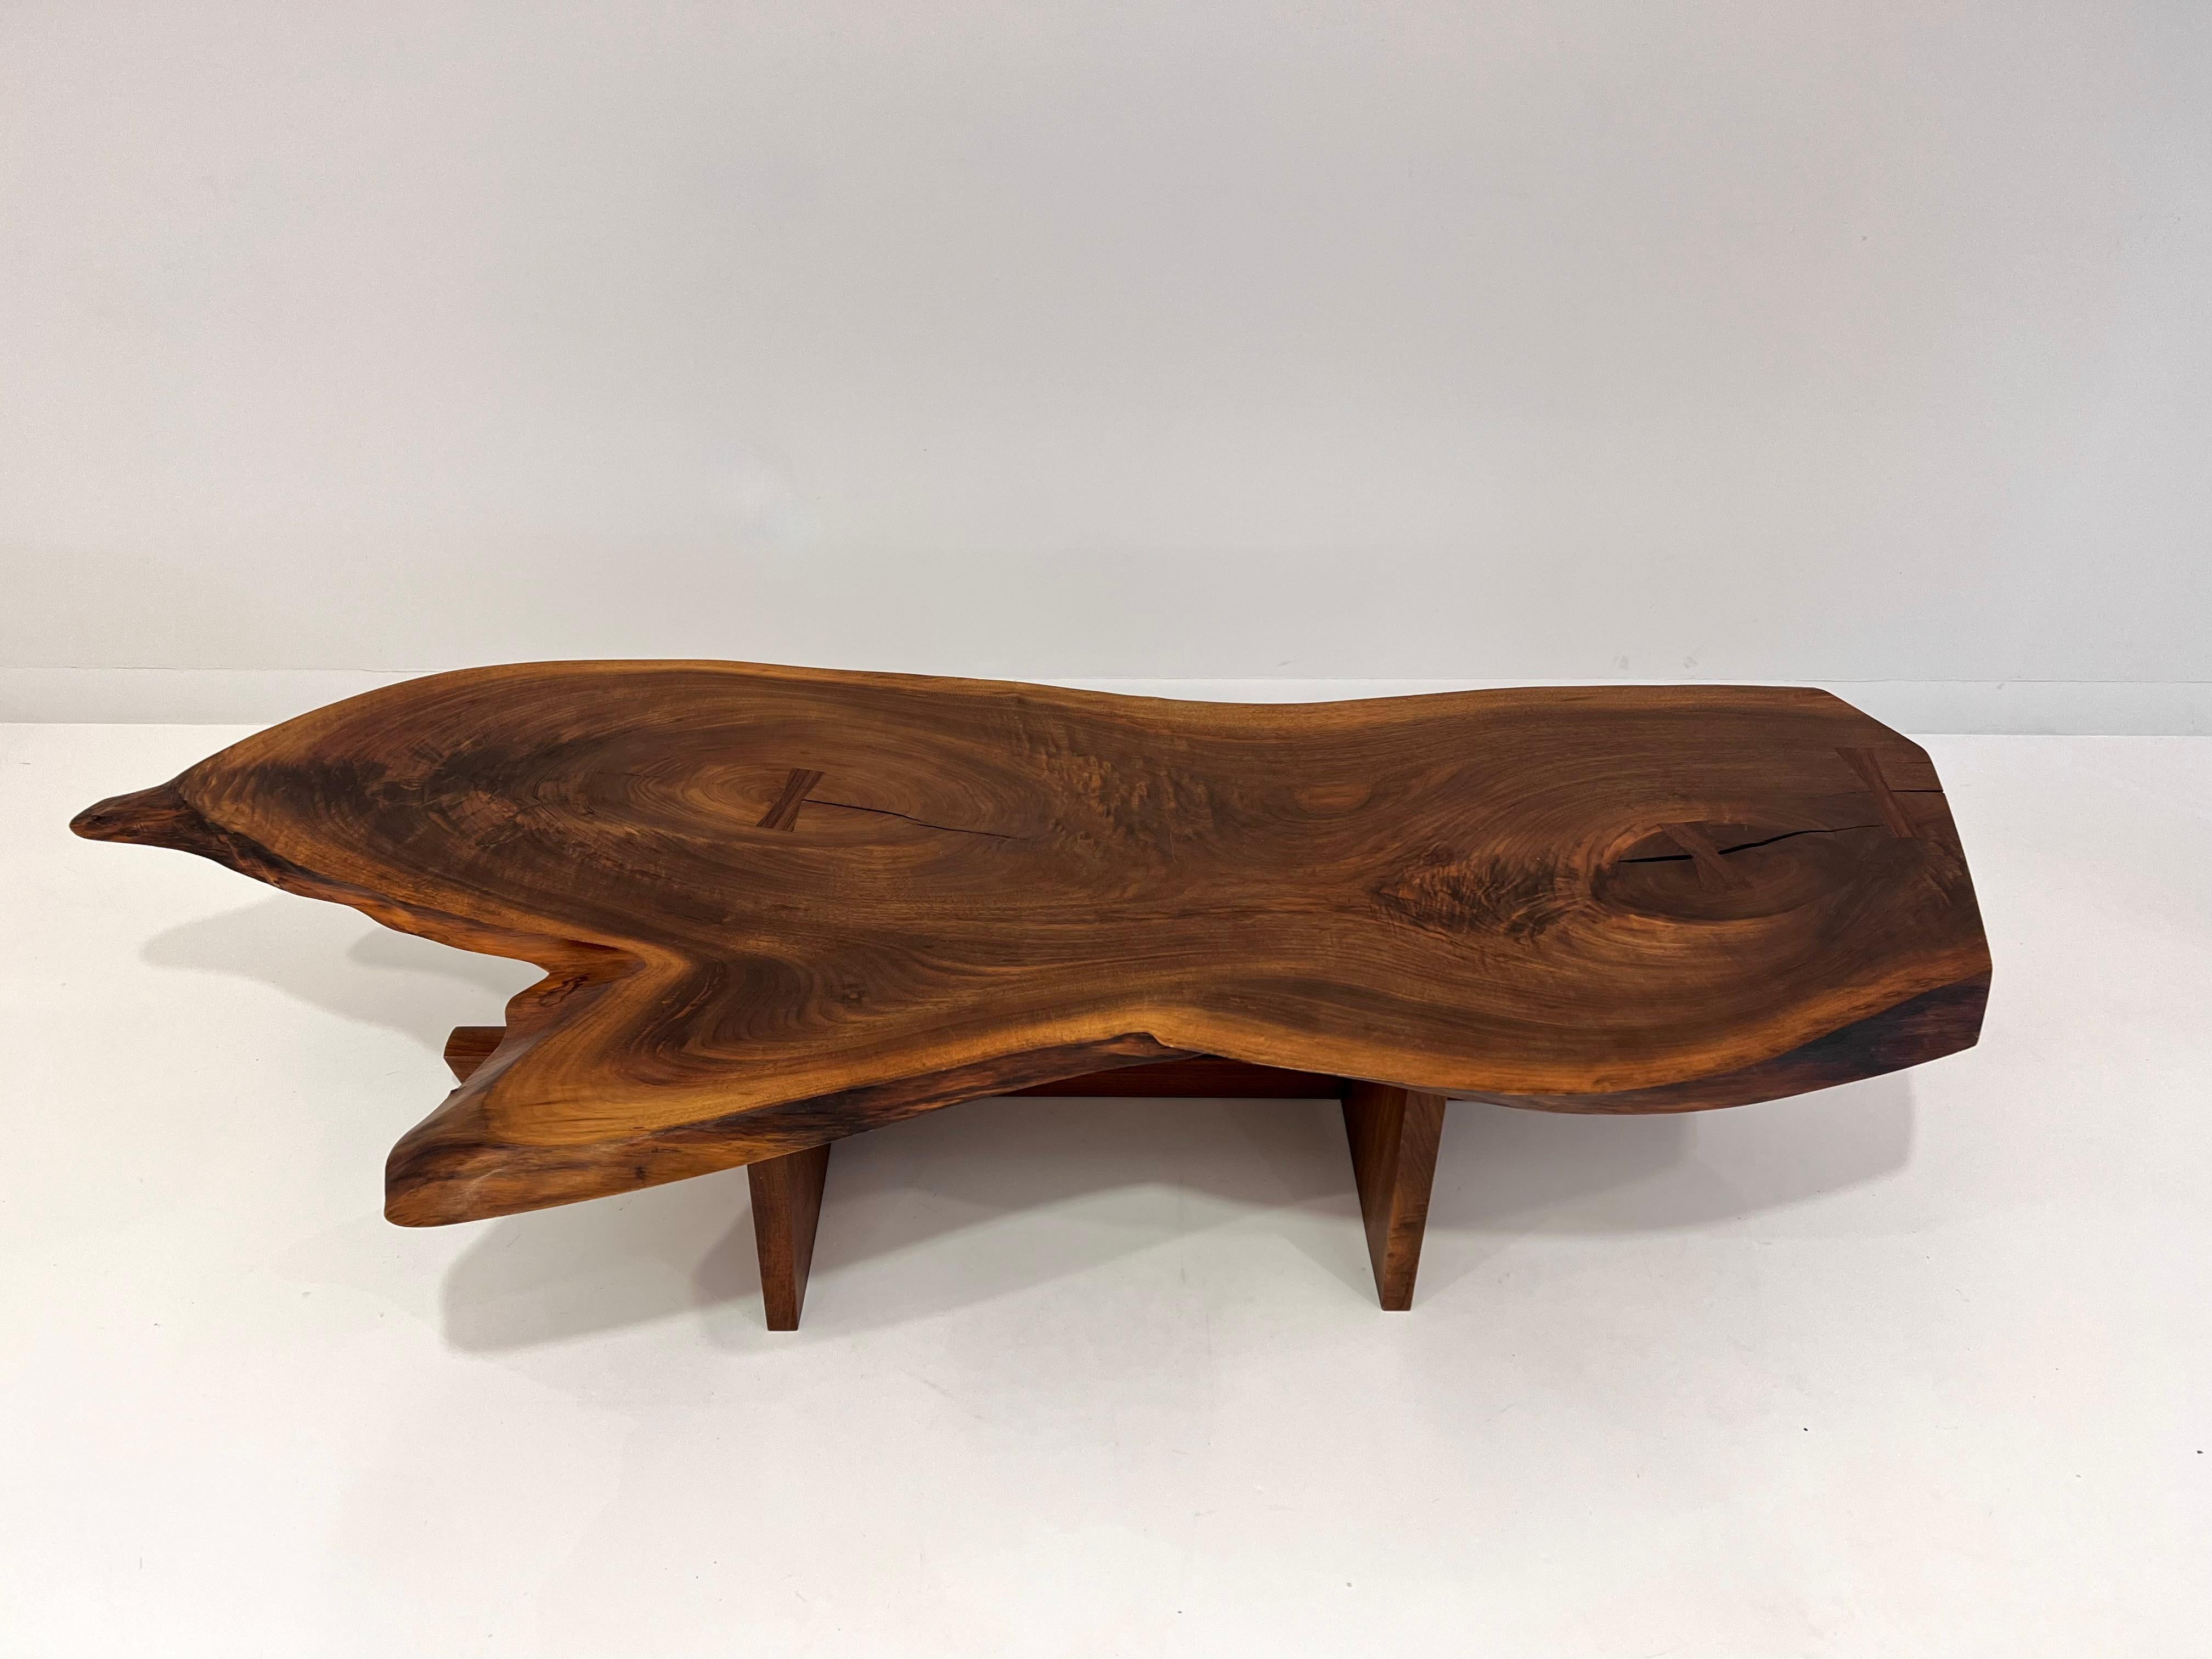 Stunning Live Edge Coffee Table by Mira Nakashima, in black walnut with dramatic variation in the grain, knot details and three rosewood butterflies. Raised on two slabs and stretcher. Signed and dated on the underside.